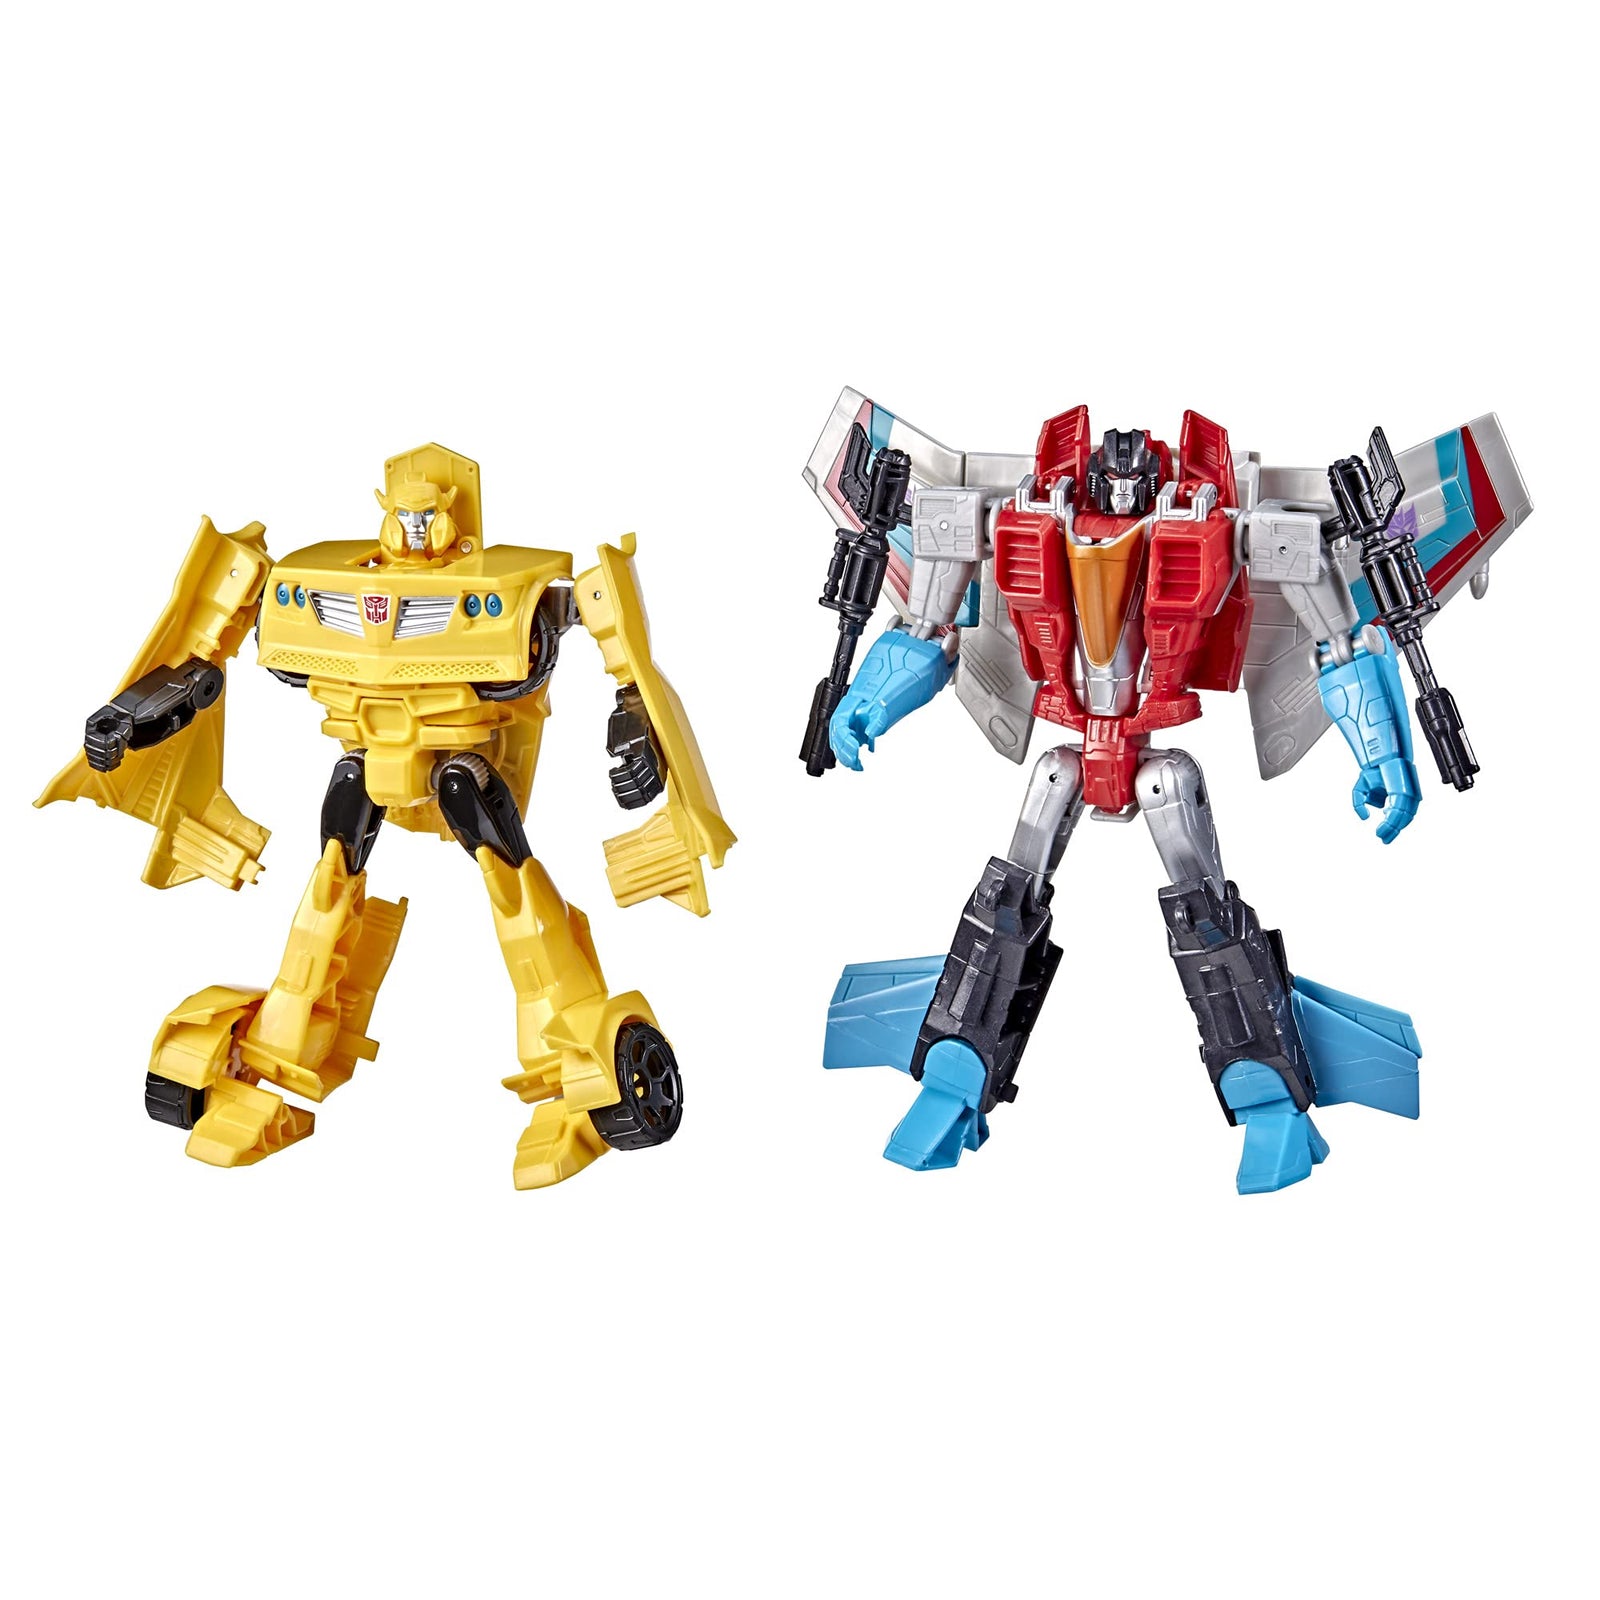 Transformers Toys Heroes and Villains Bumblebee and Starscream 2-Pack Action Figures - for Kids Ages 6 and Up, 7-inch